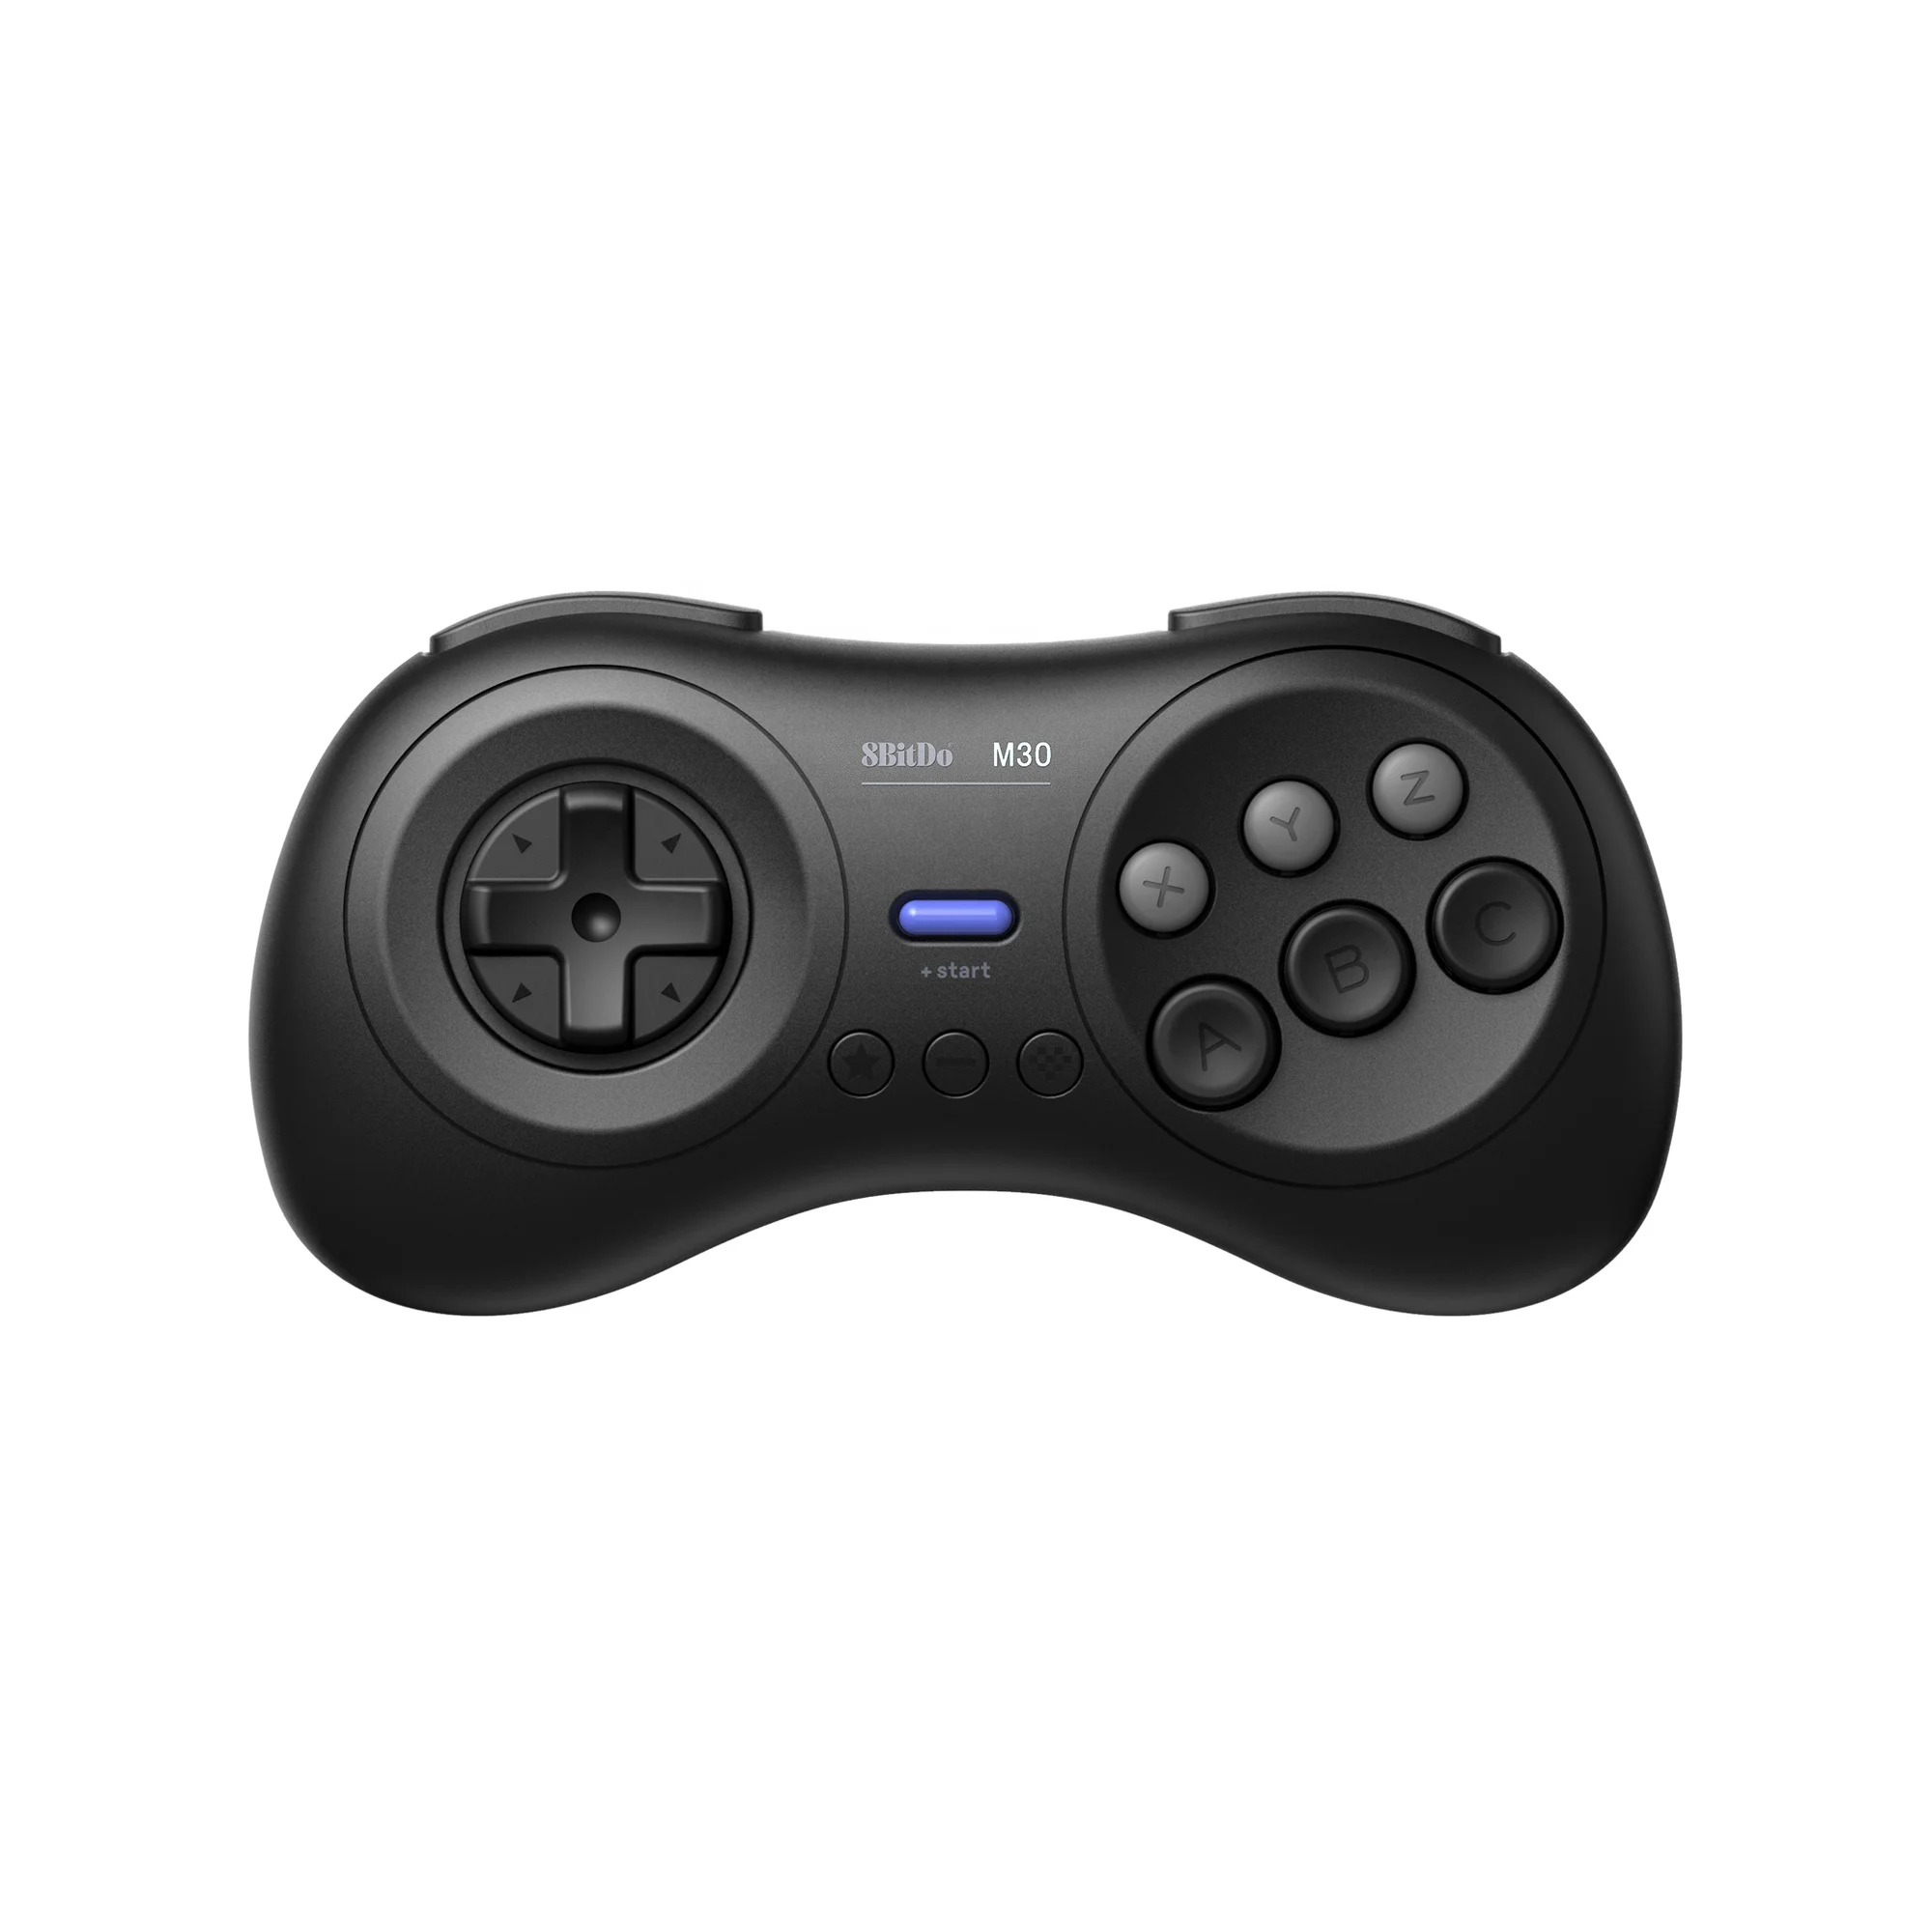 

8Bitdo M30 BT Mega Drive Style Wireless Gamepad For Switch/ PC and Android Devices, Support Steam and Raspberry Pi Controller, Black